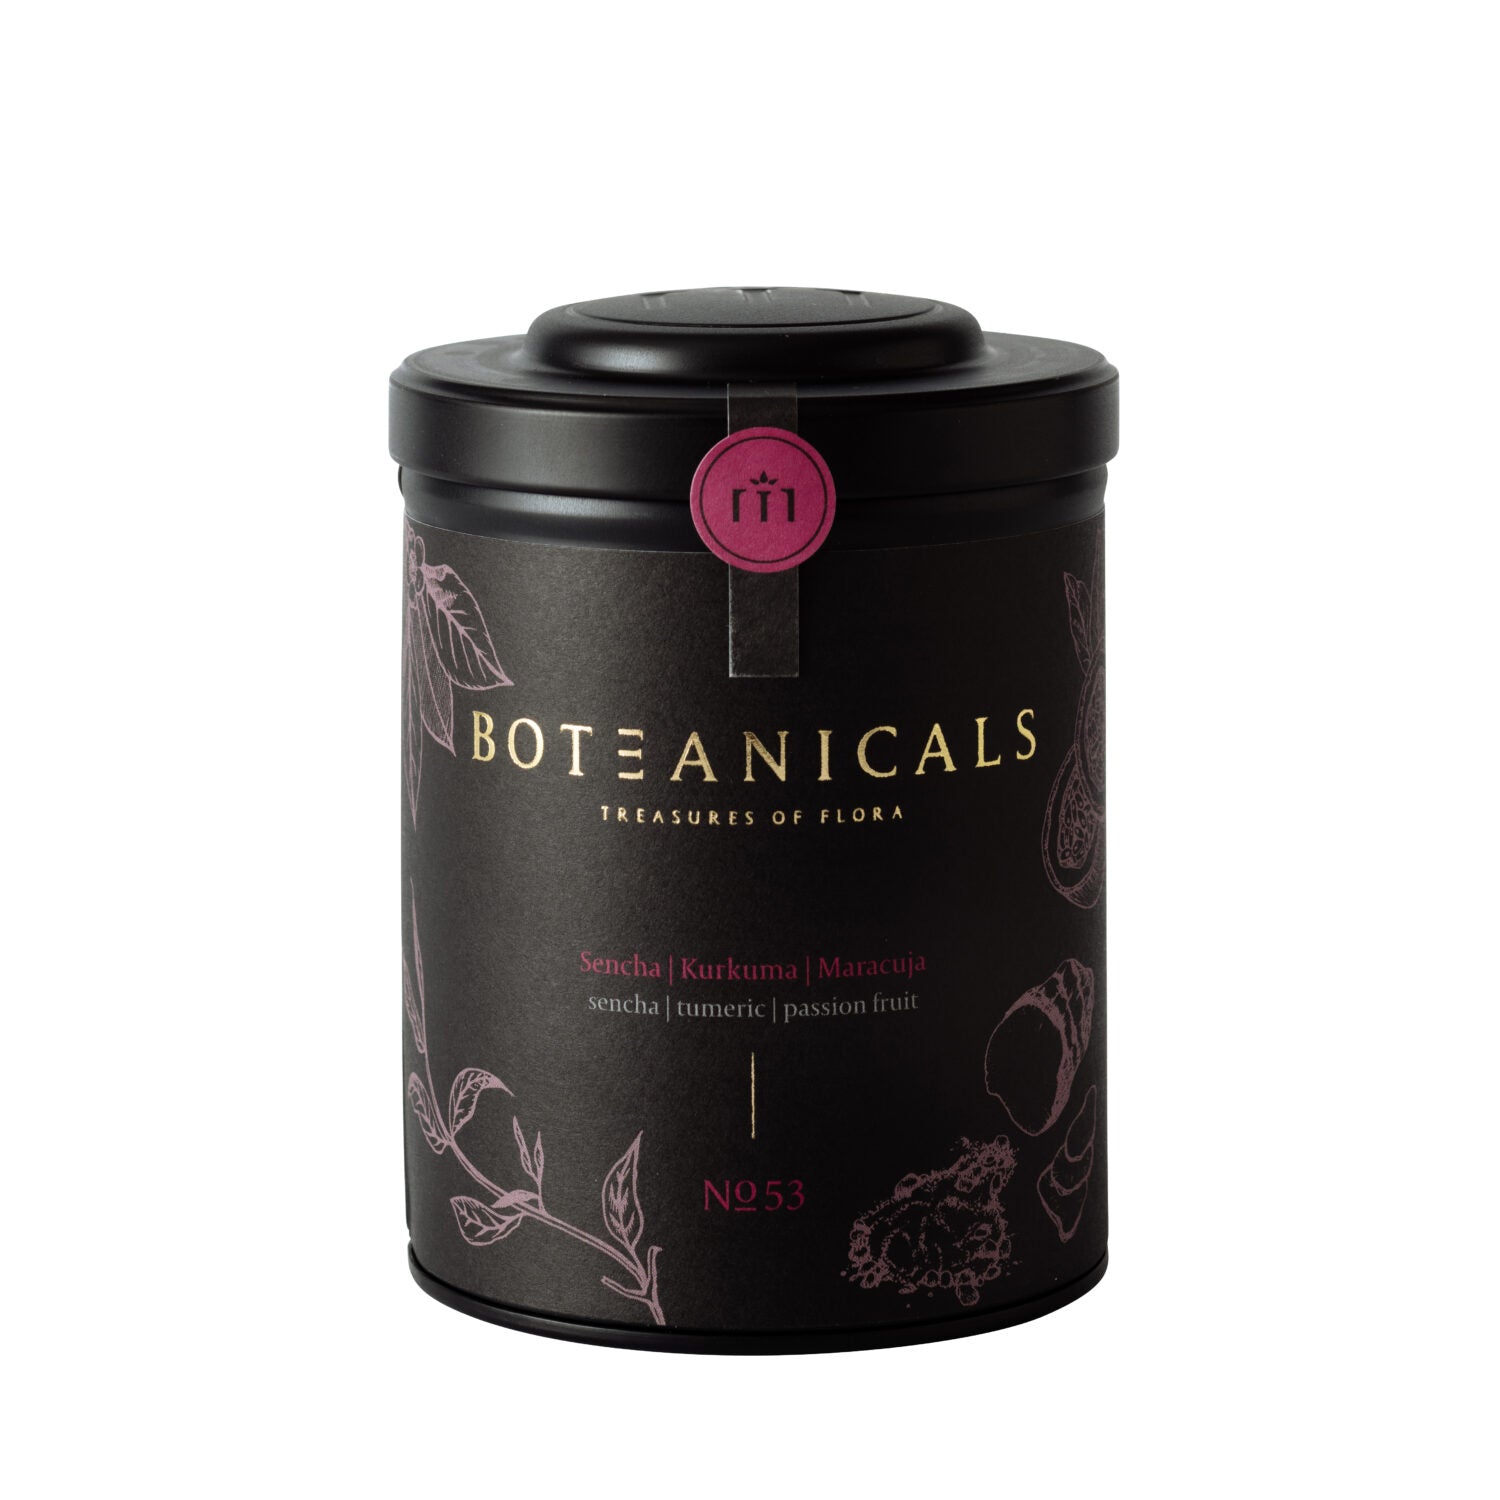 Boteanicals_No53_01